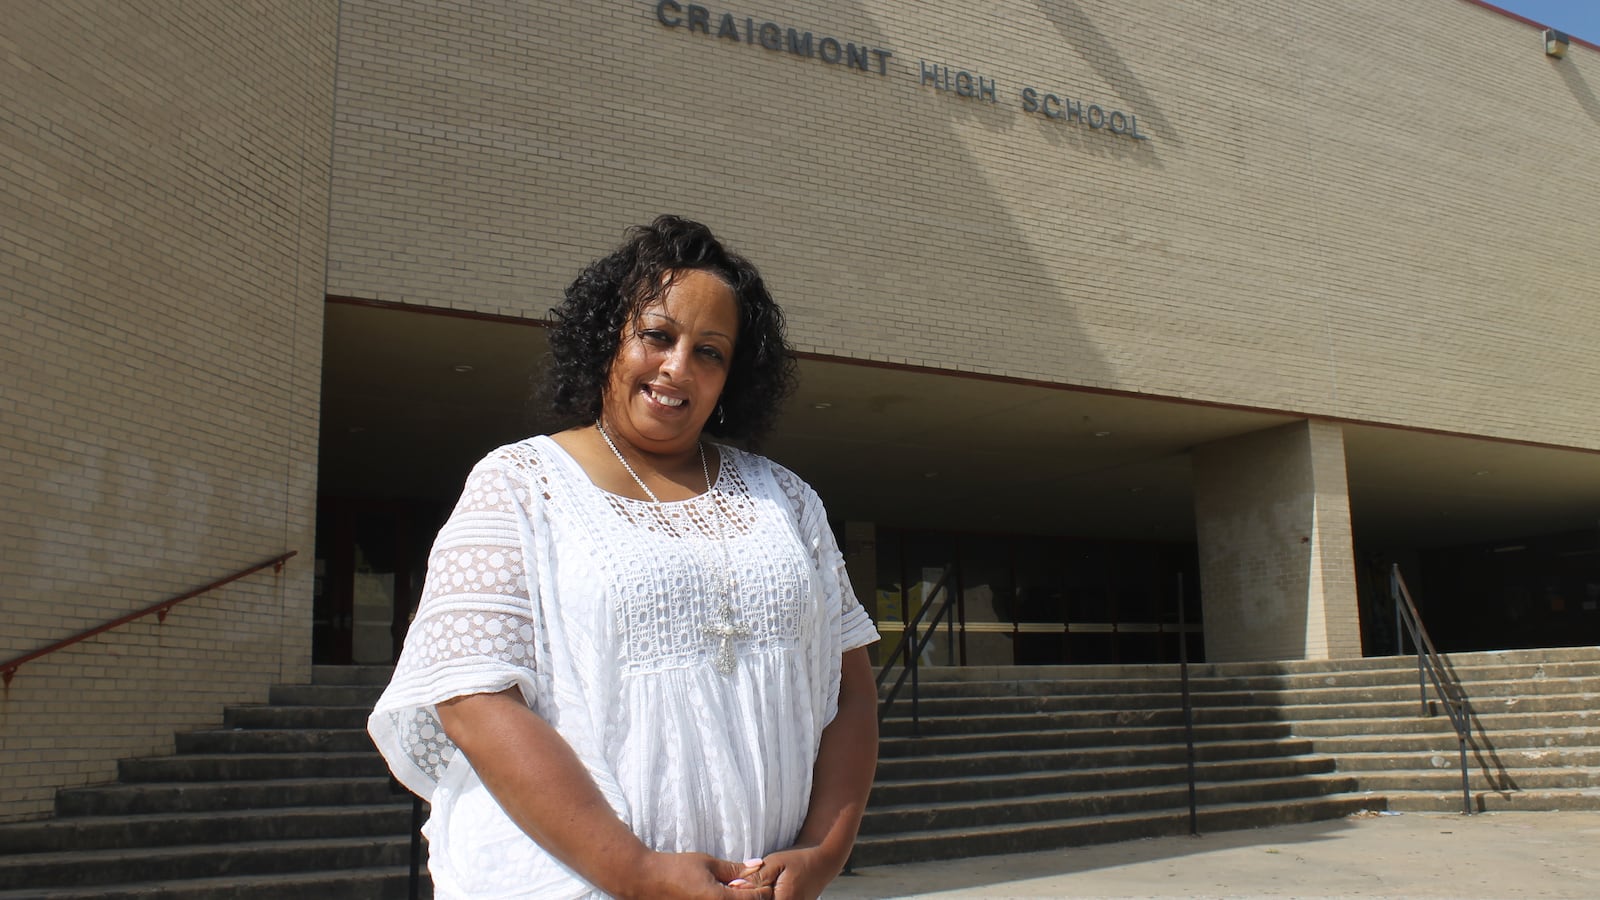 Principal Tisha Durrah stands at the entrance of Craigmont High, a Memphis school that soon will host one of the city's first school-based, after-school clubs operated by the Boys & Girls Club of Greater Memphis.